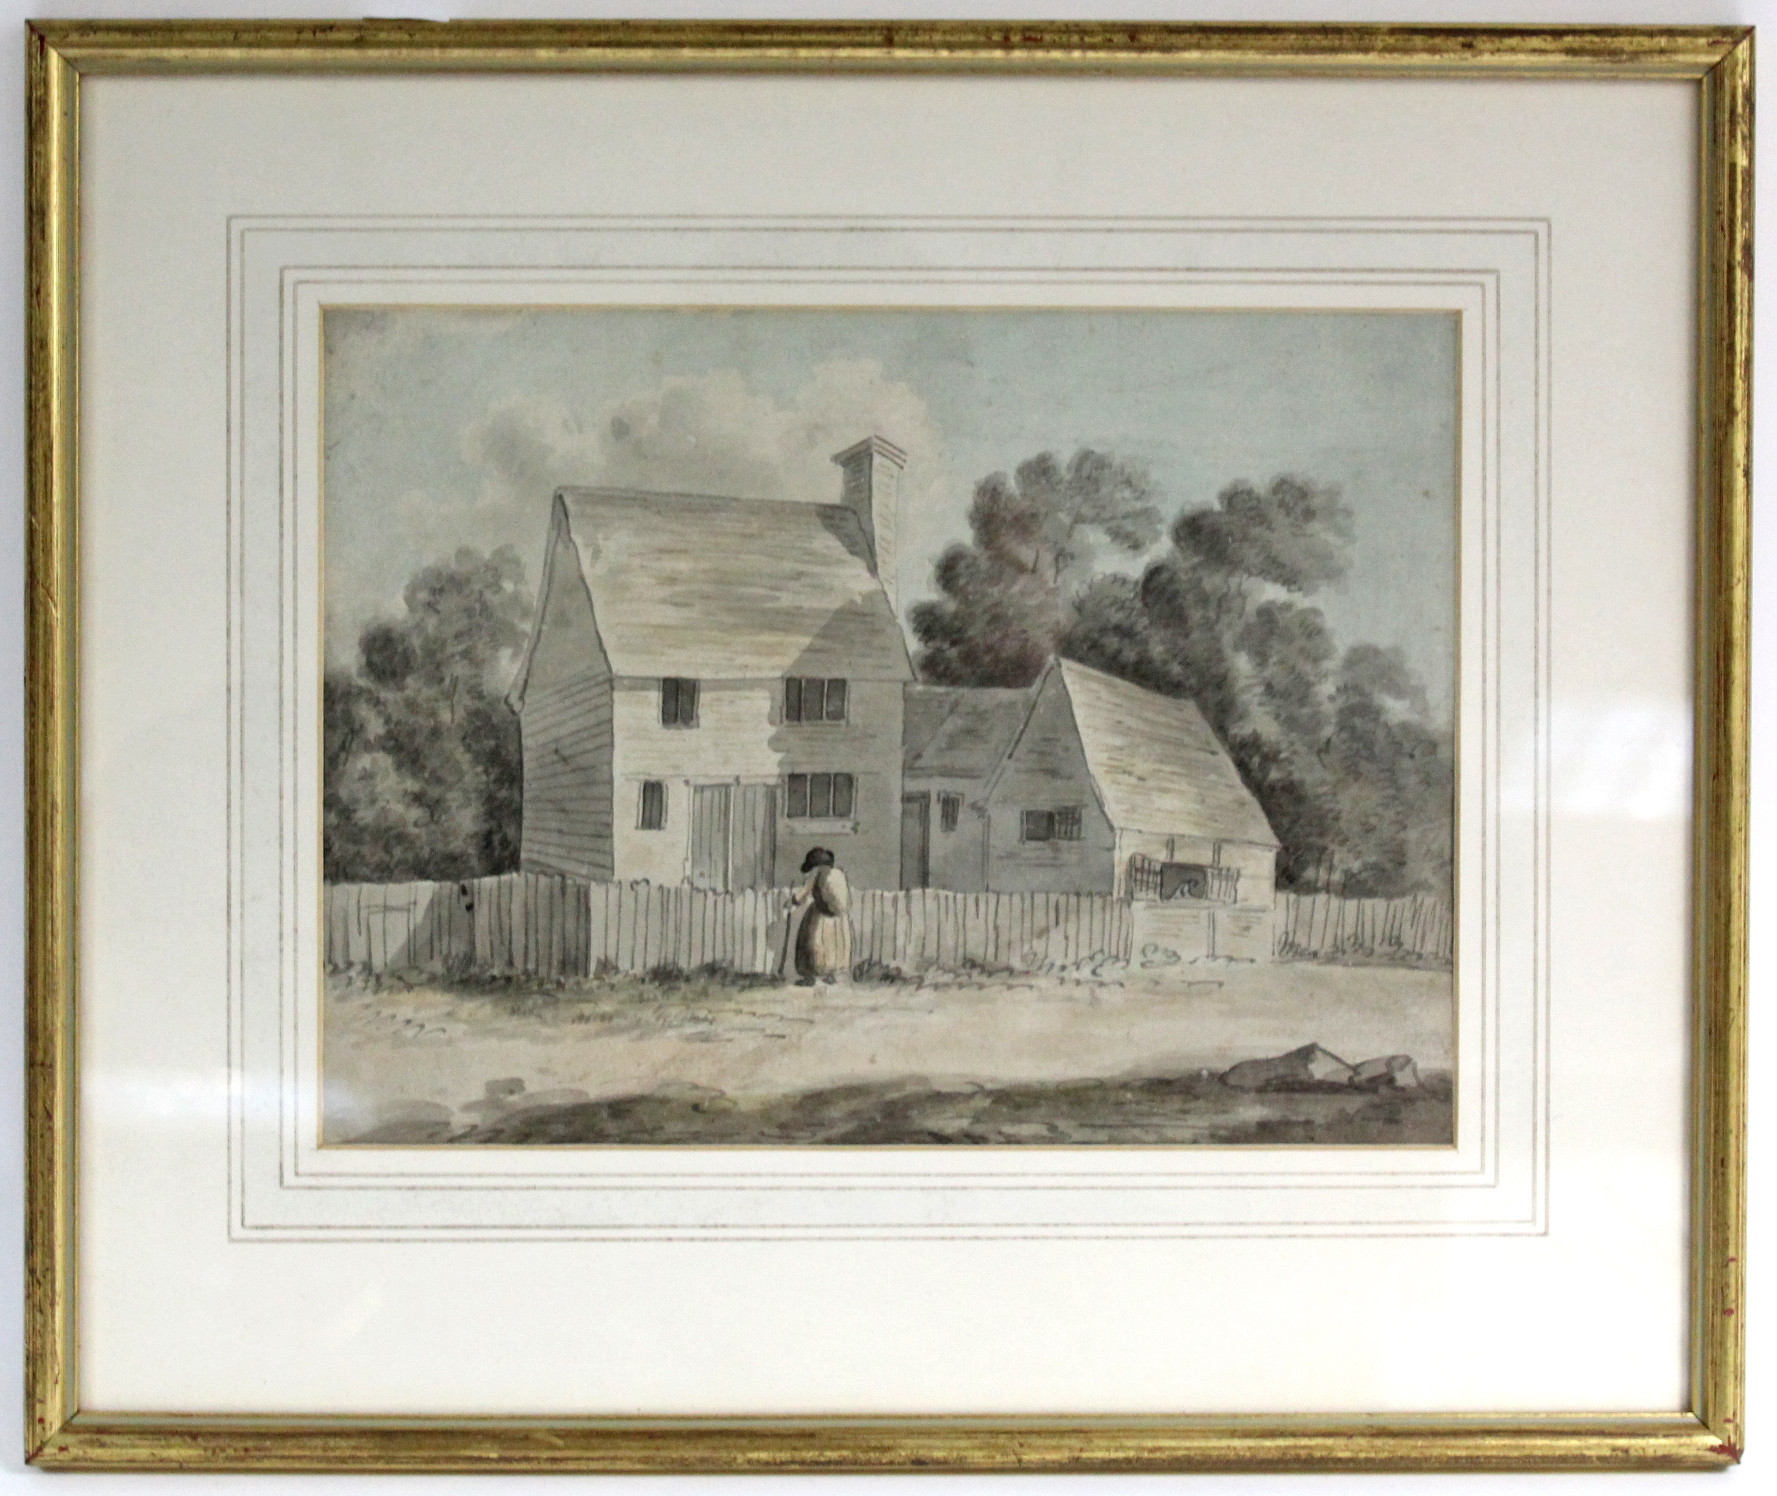 ENGLISH SCHOOL, late 18th/early 19th century. A rural scene with a figure beside cottages; & a